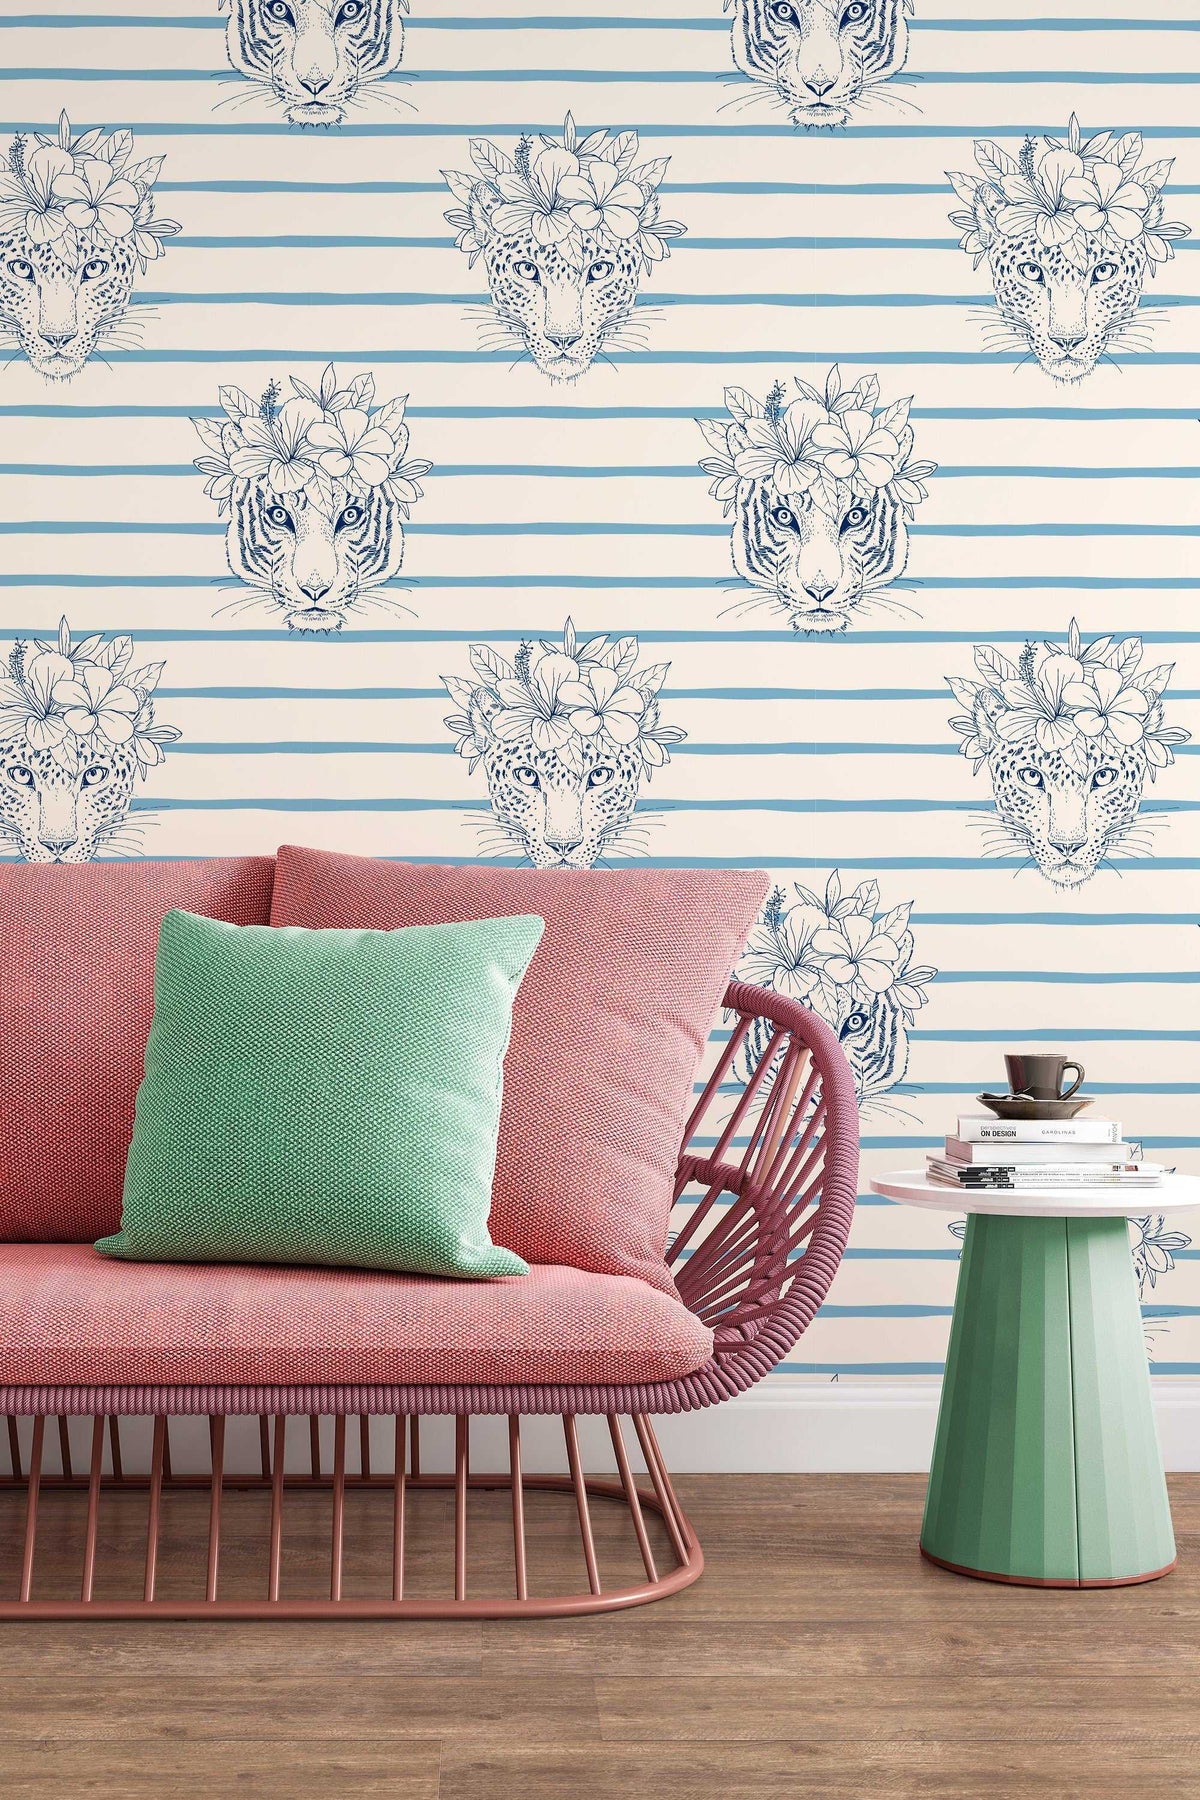 Tigers and cheetahs print with flowers and stripes wallpaper  blue on beige  design 3136  California wallpaper